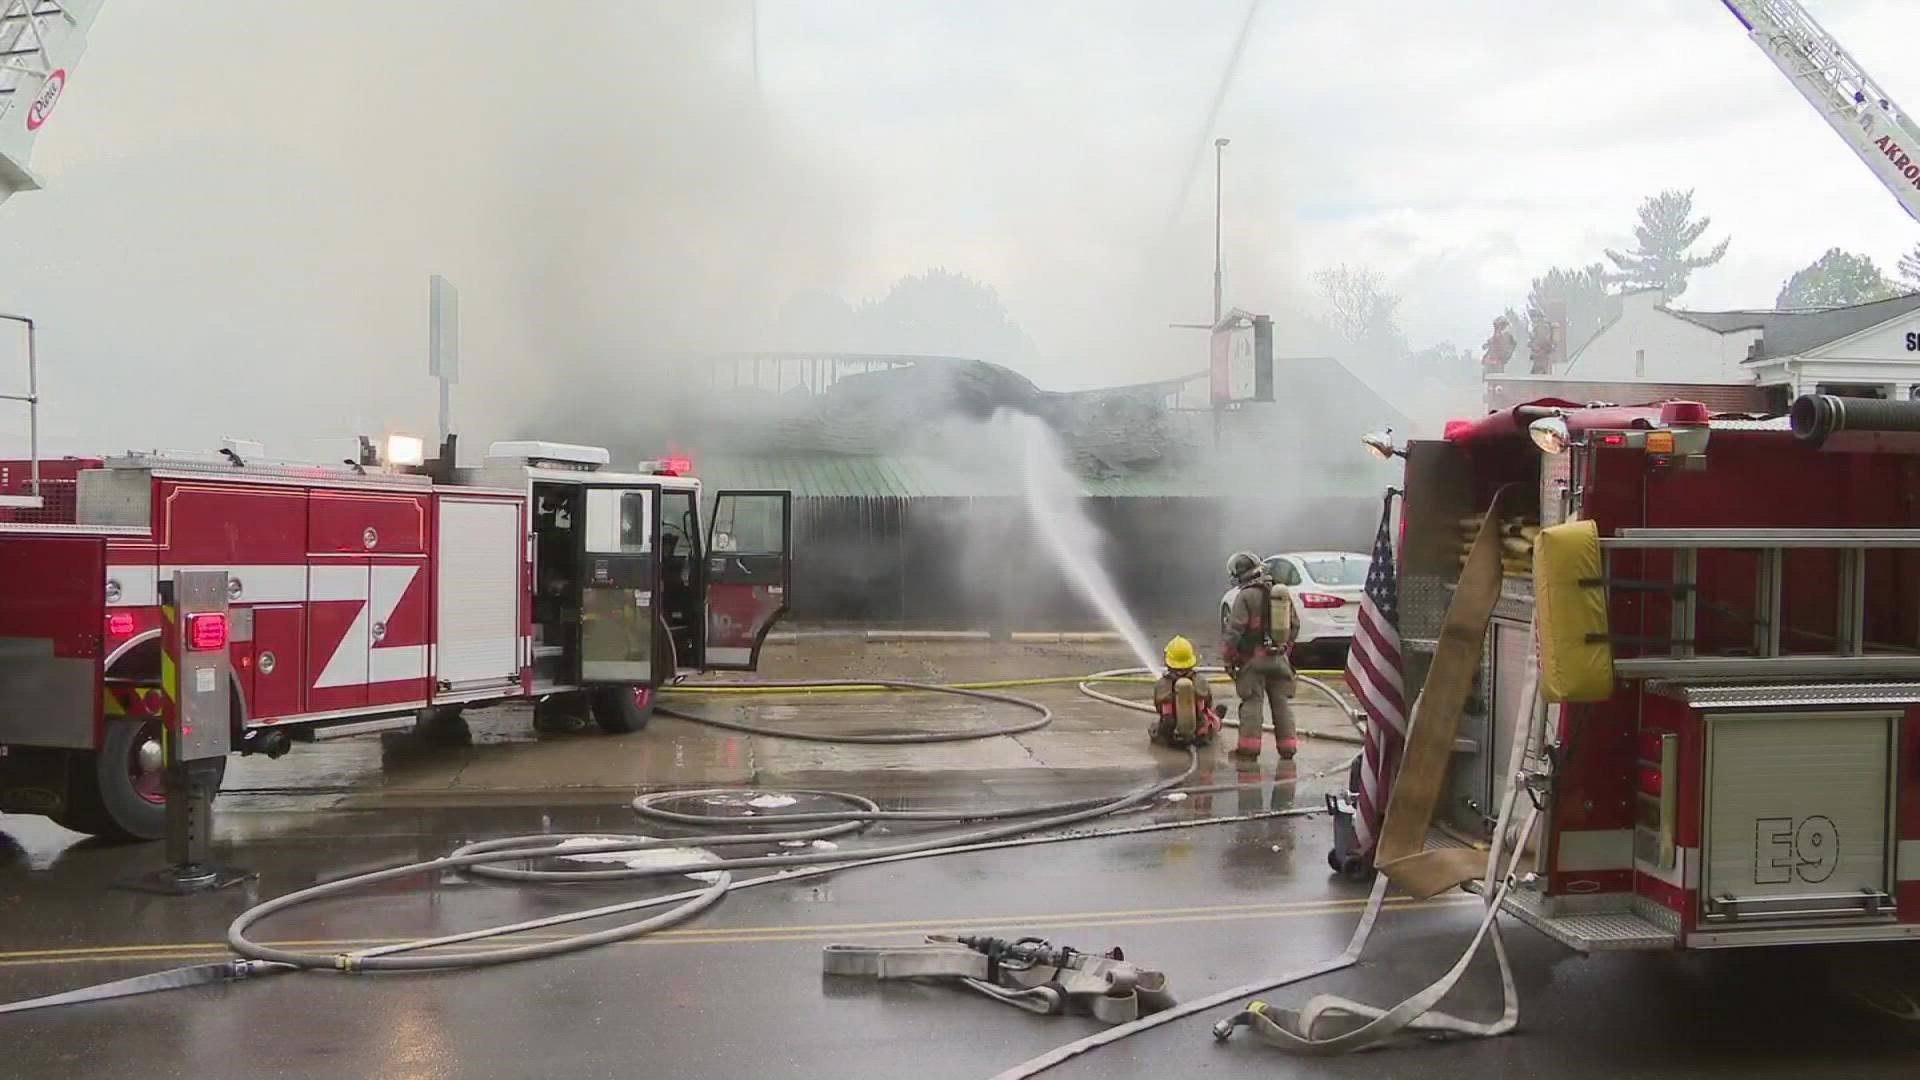 Firefighters have been battling a massive fire at Pavona's Pizza Joint in Akron.